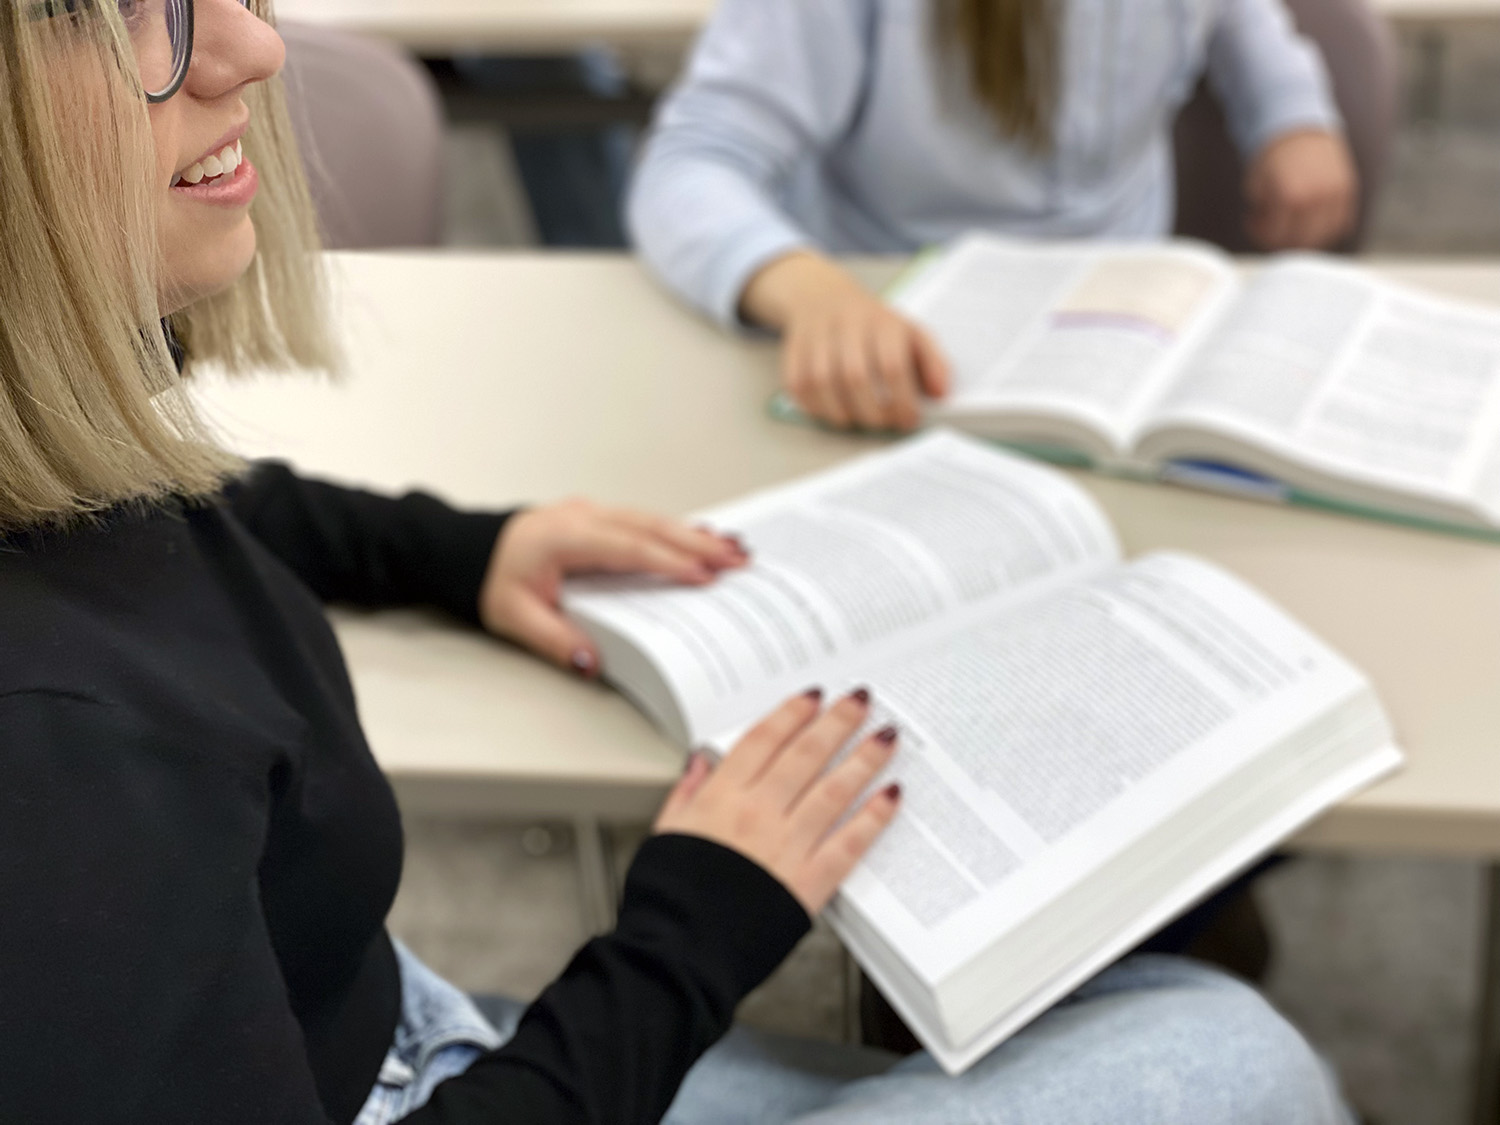 A female student sits at a desk with her hands on an open textbook.